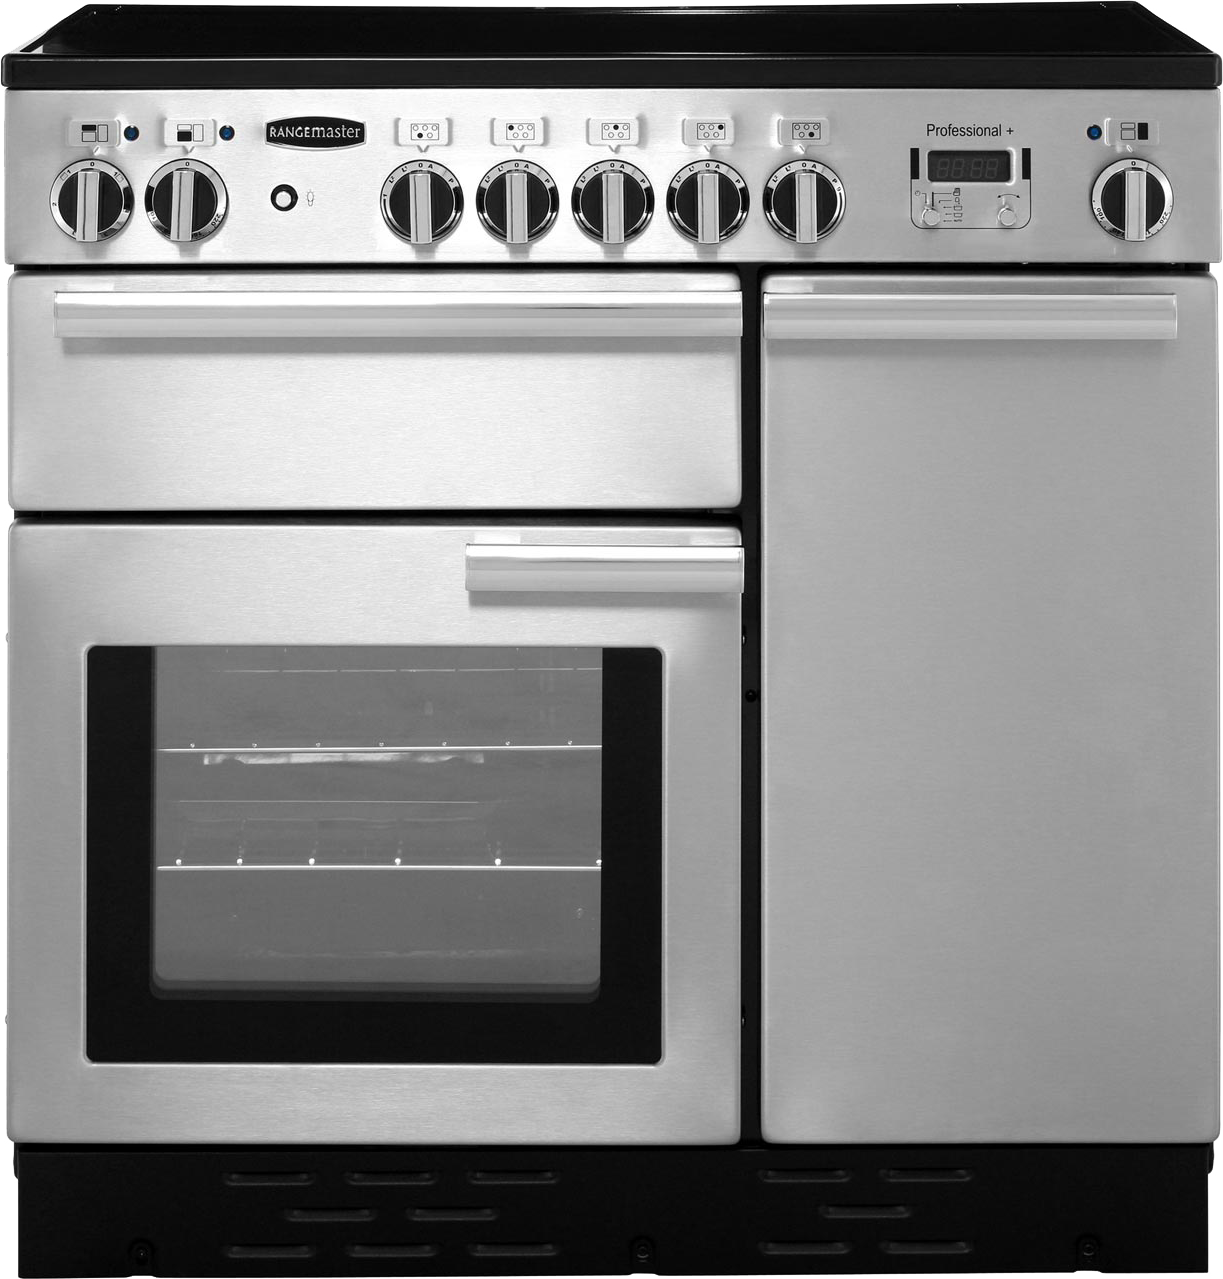 Rangemaster Professional Plus PROP90EISS/C 90cm Electric Range Cooker with Induction Hob - Stainless Steel - A/A Rated, Stainless Steel